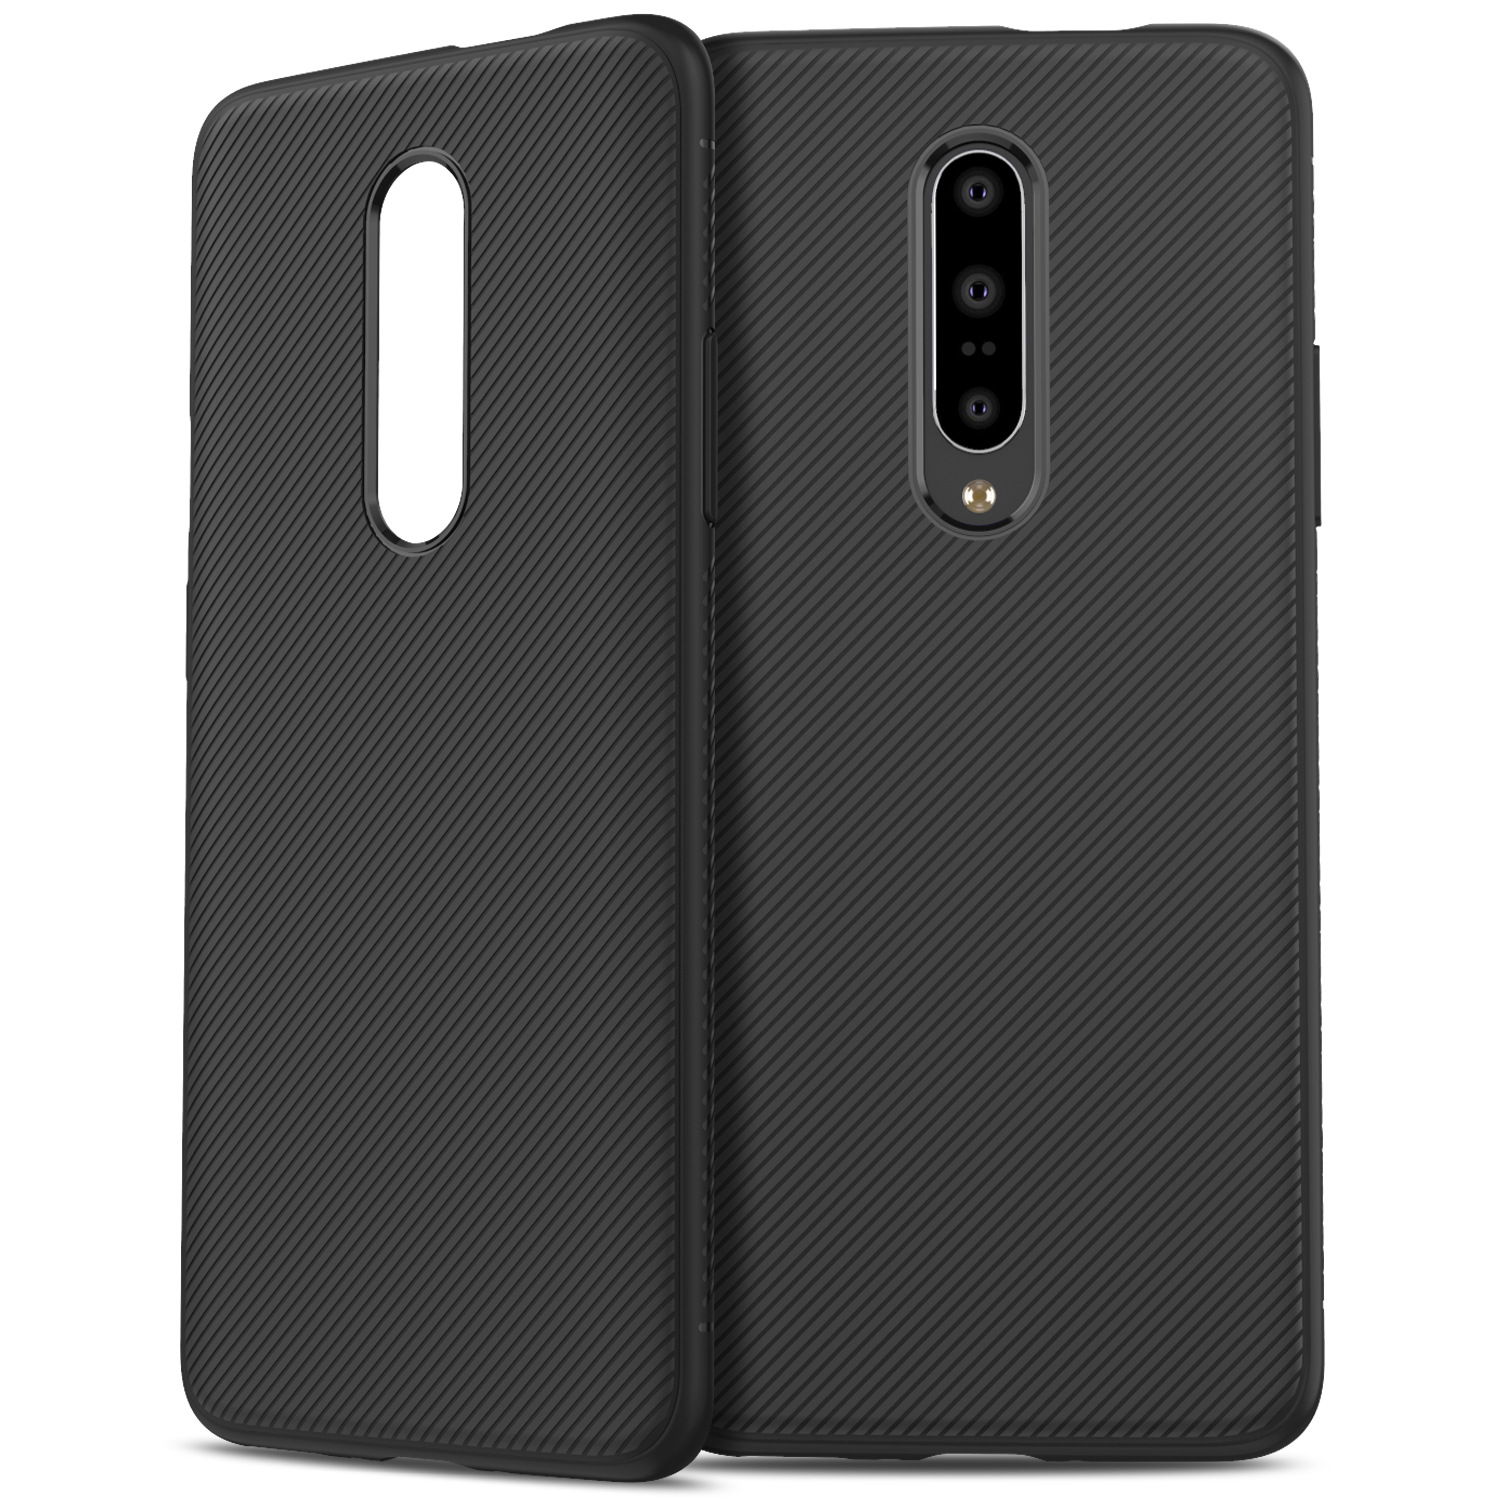 

Bakeey Soft Silicone Texture Carbon Fiber Slim Shockproof Protective Case For OnePlus 7 Pro